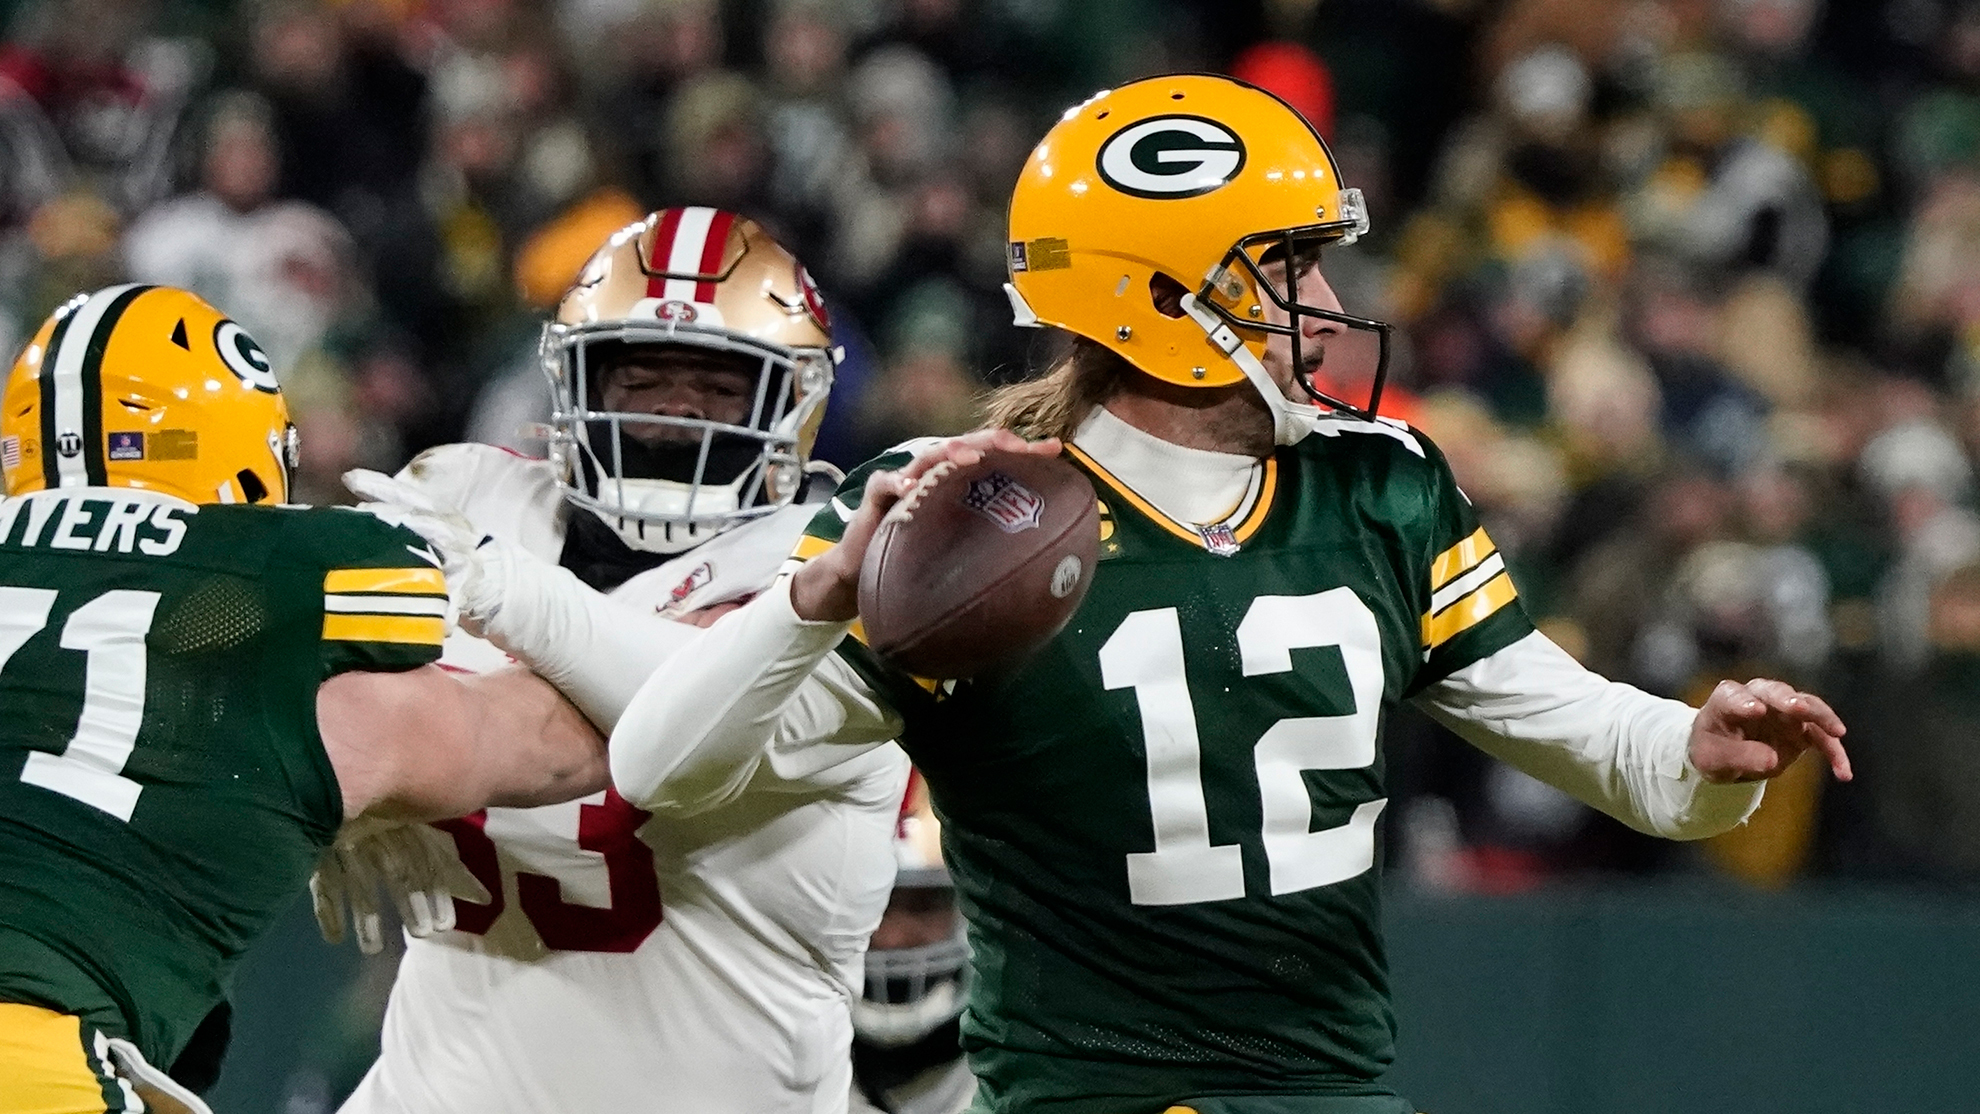 49ers 13-10 Packers: 49ers 13-10 Packers: Final score and highlights